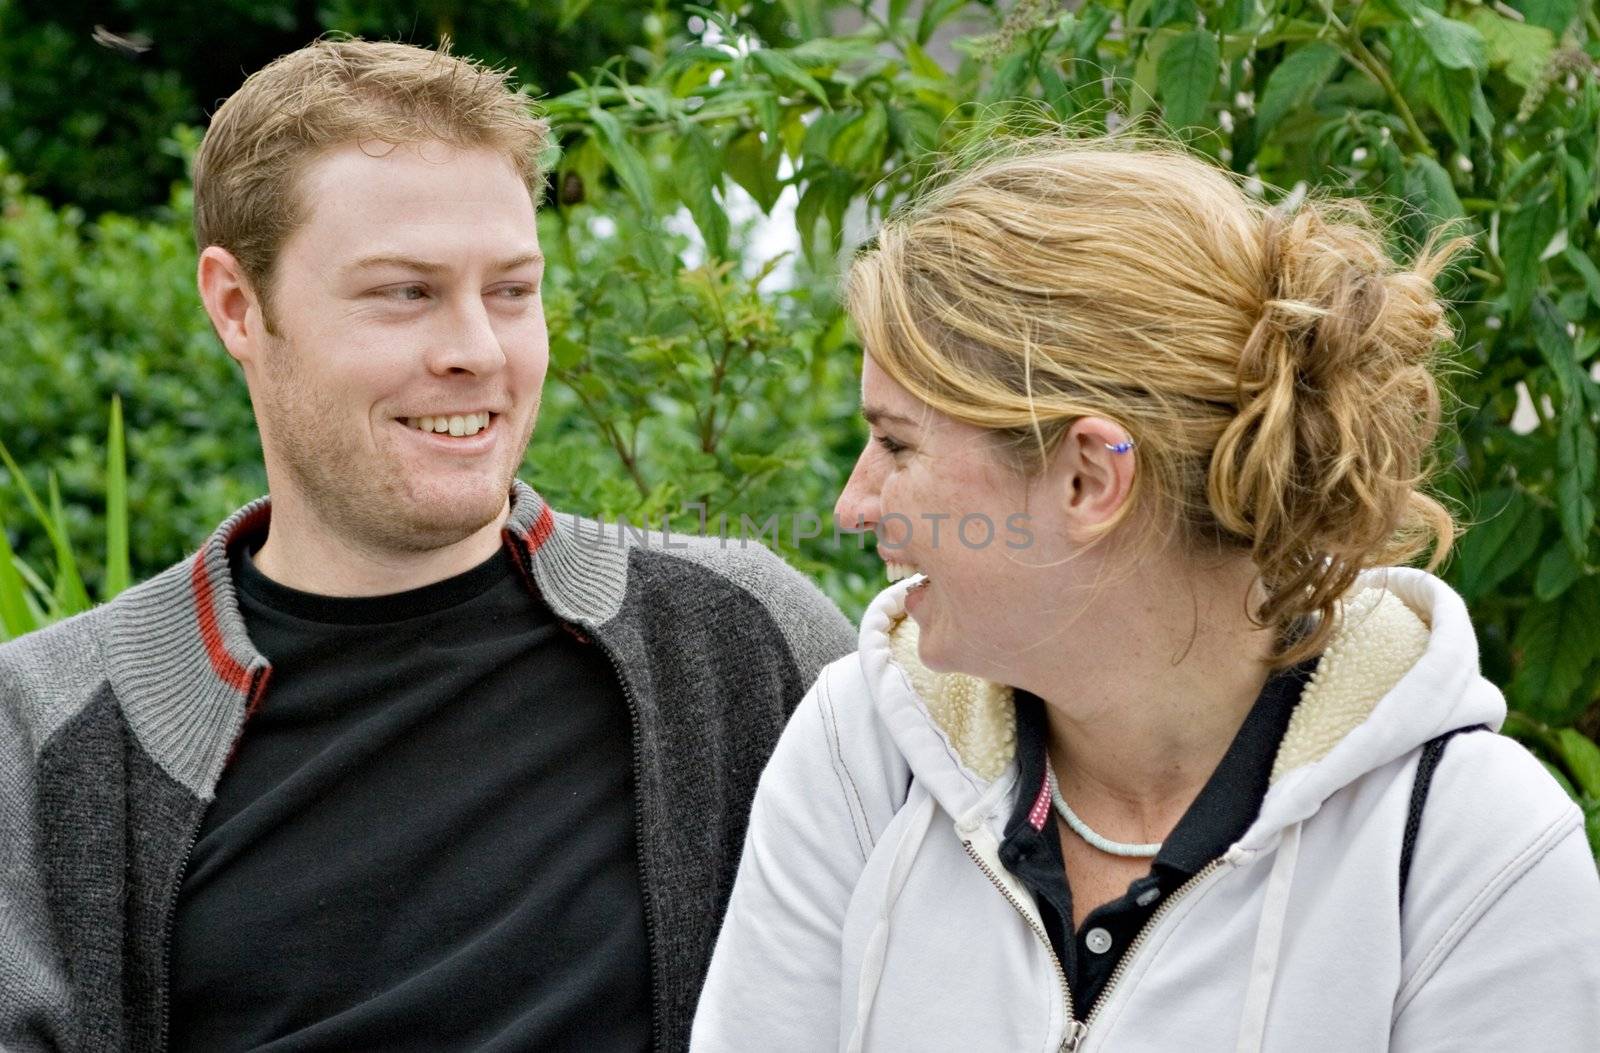 A young man and young woman talking and laughing. They are enjoying each others company.